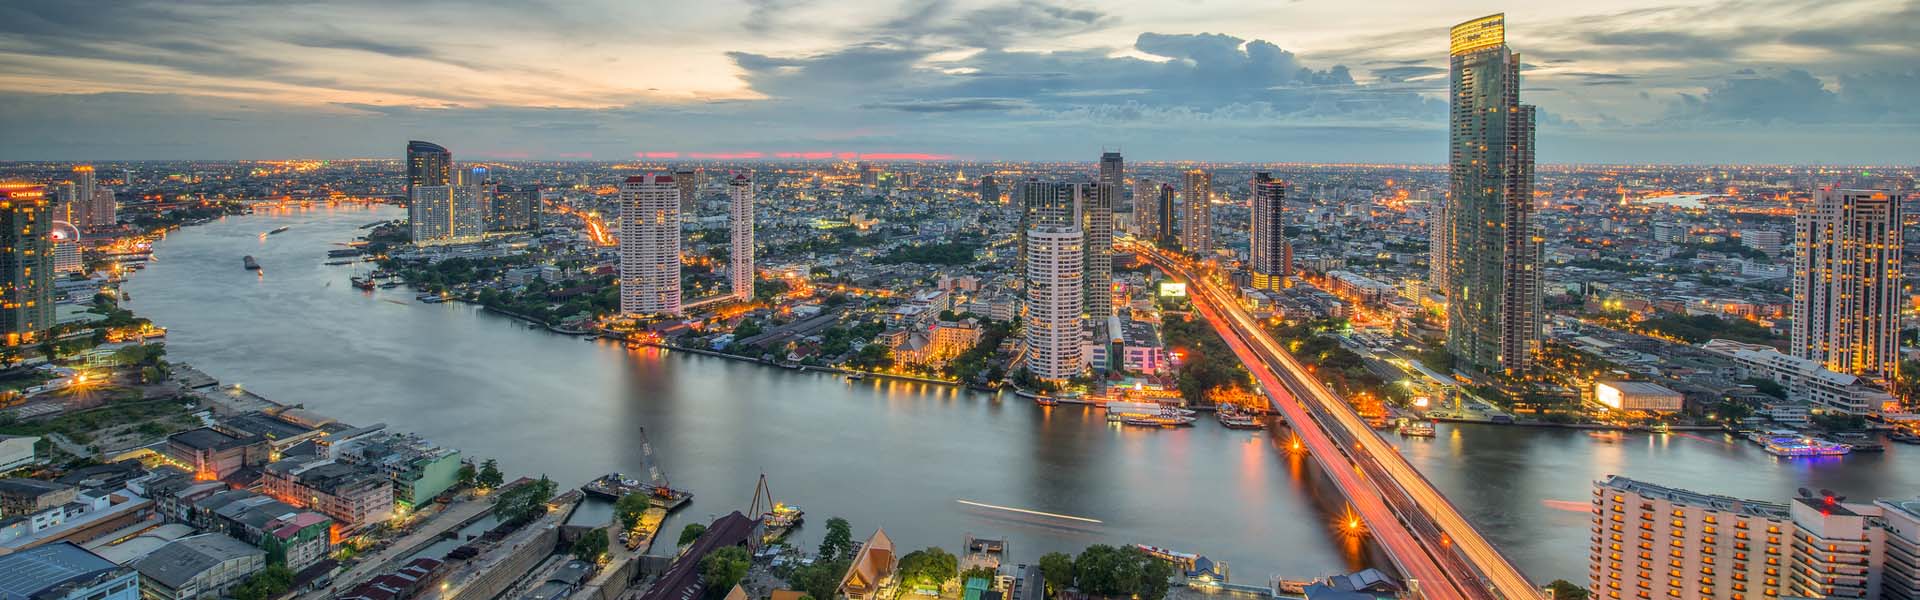 Discount And Promotion Ticket To Bangkok Attractions For Family Friends And Kids